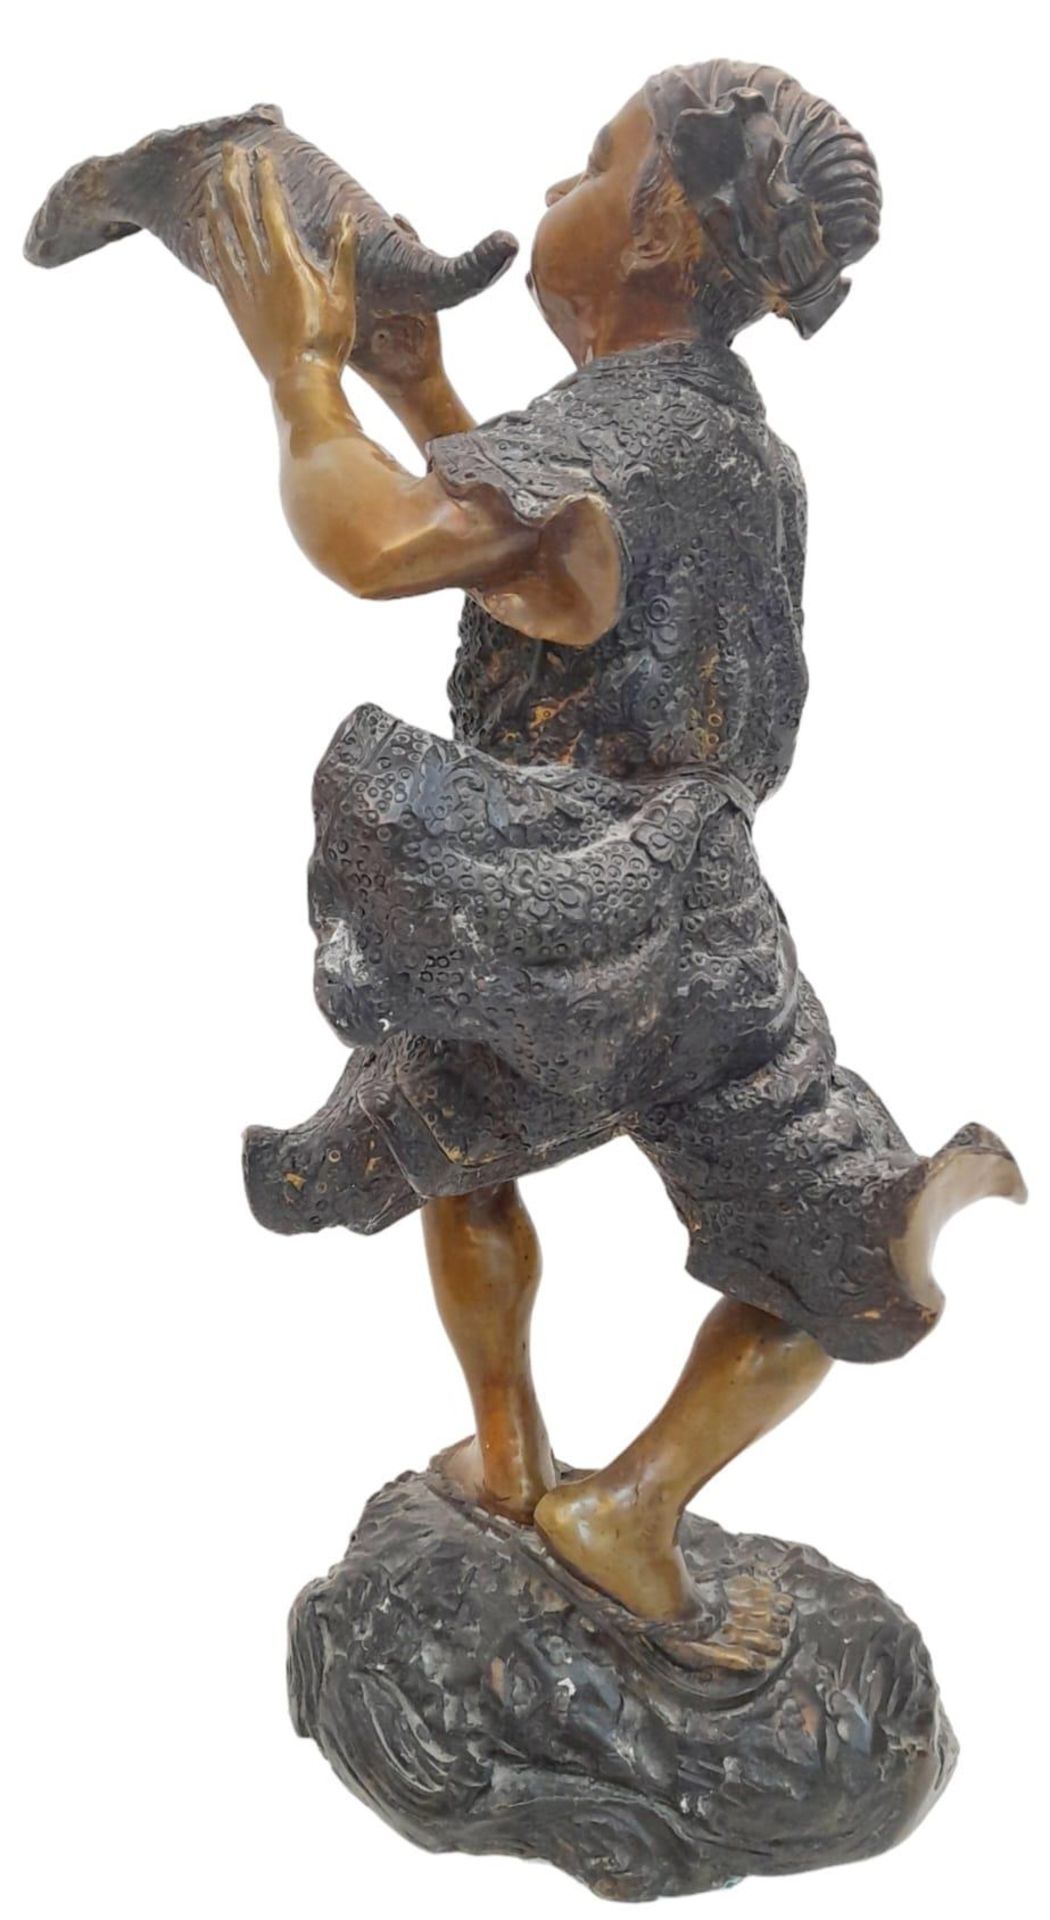 A Magnificent Large Antique Japanese Edo Period Okimono Bronze Statue Depicting a Young Man - Image 7 of 7